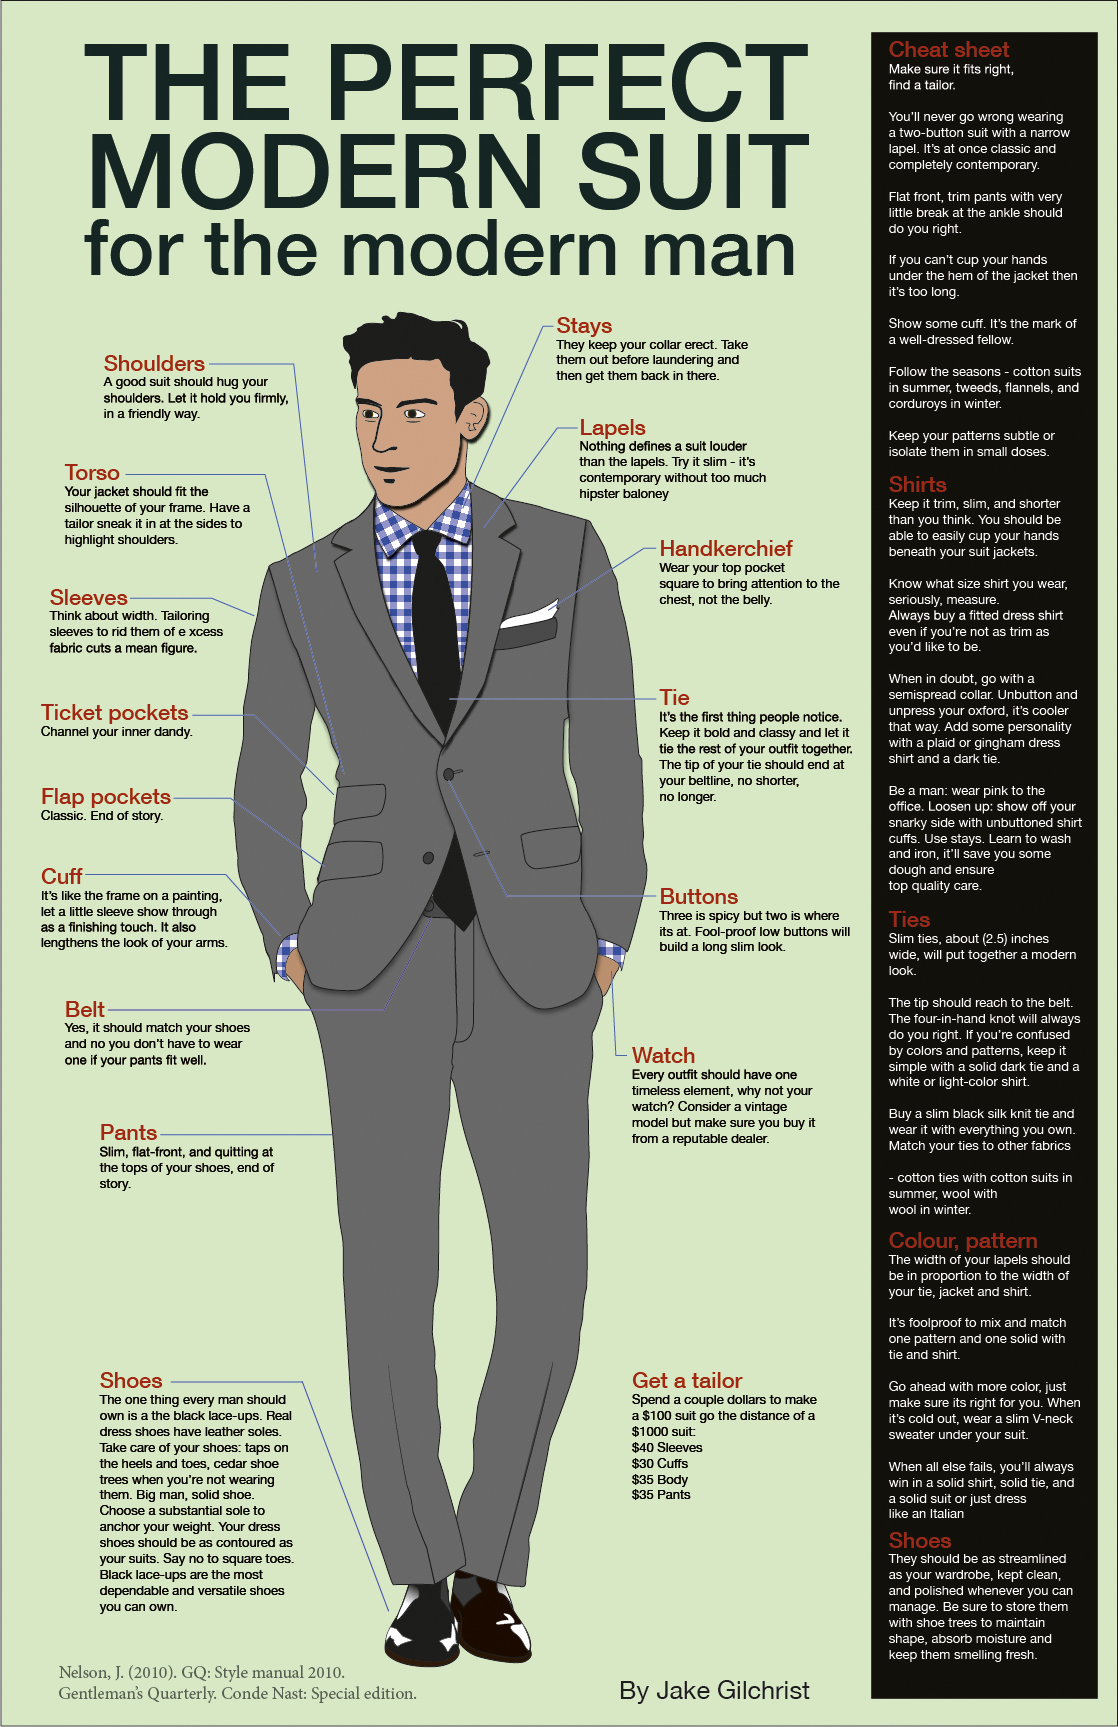 Fashion infographic on suits